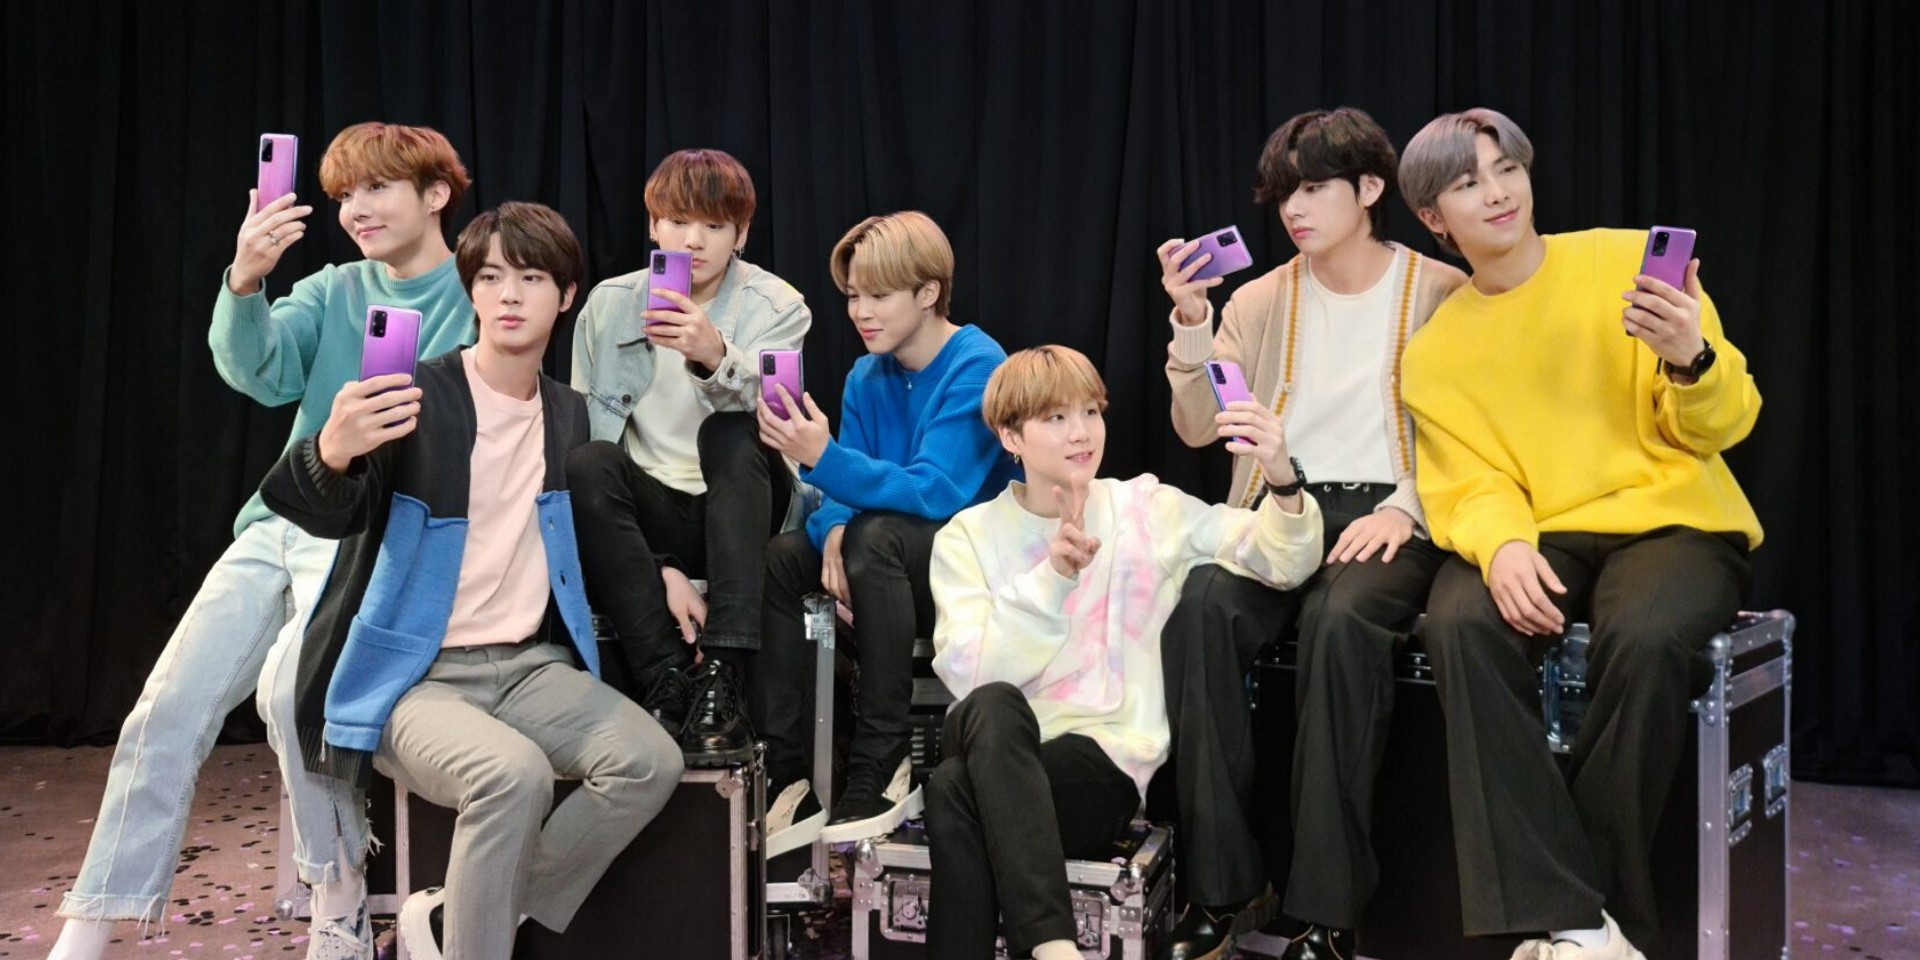 How the Internet is reacting to BTS' new purple phone